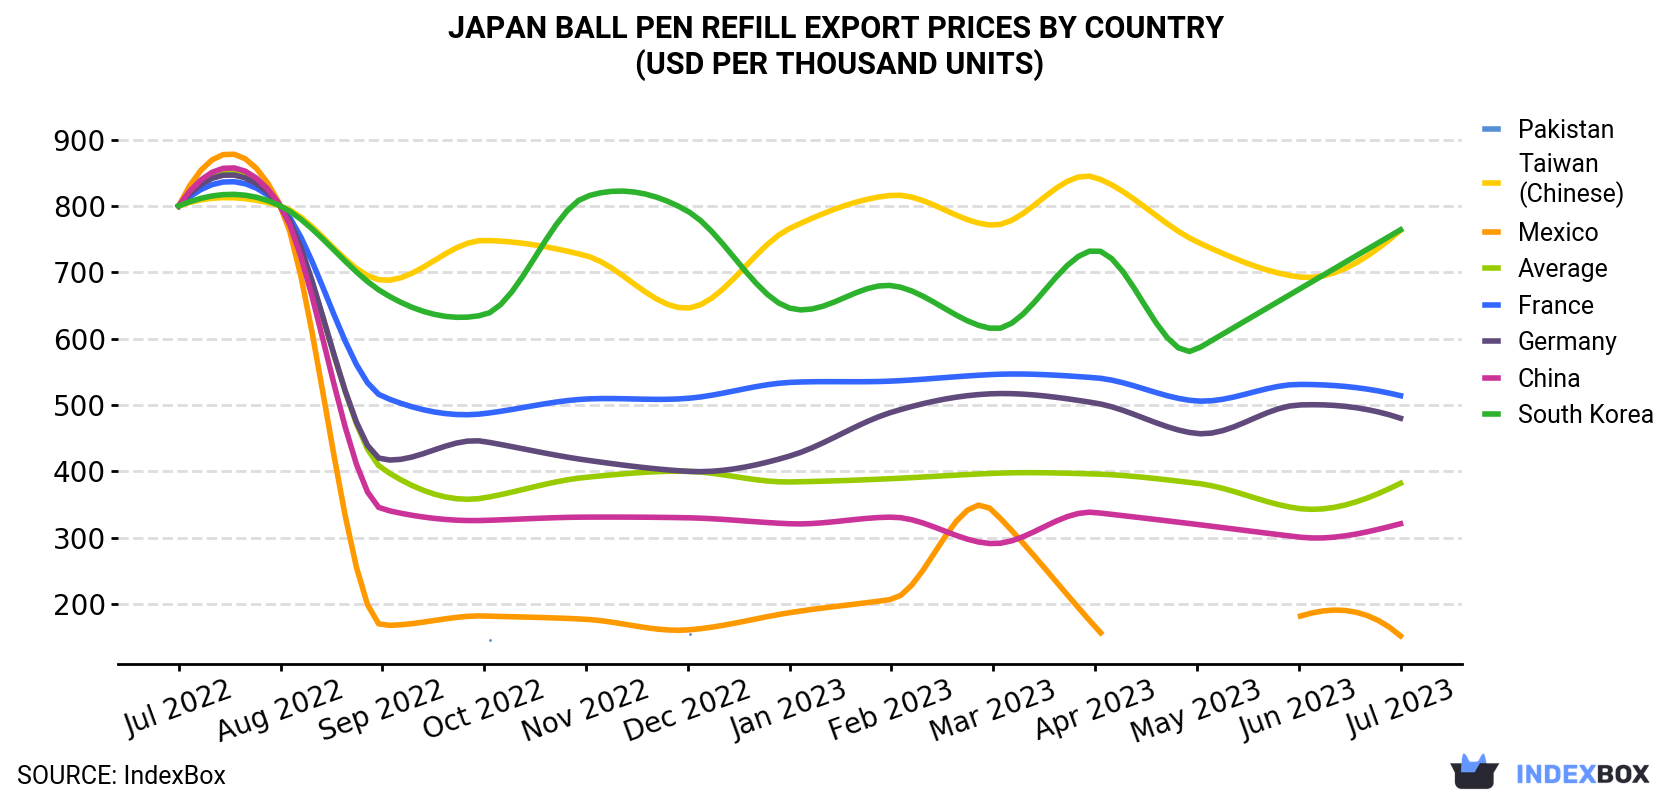 Japan Ball Pen Refill Export Prices By Country (USD Per Thousand Units)